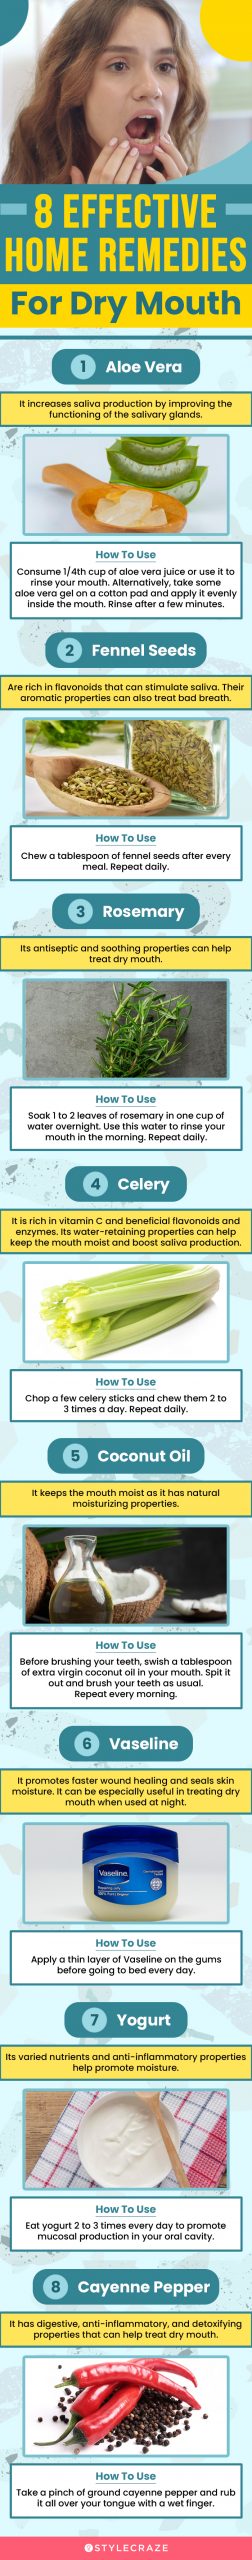 8 effective home remedies for dry mouth (infographic)